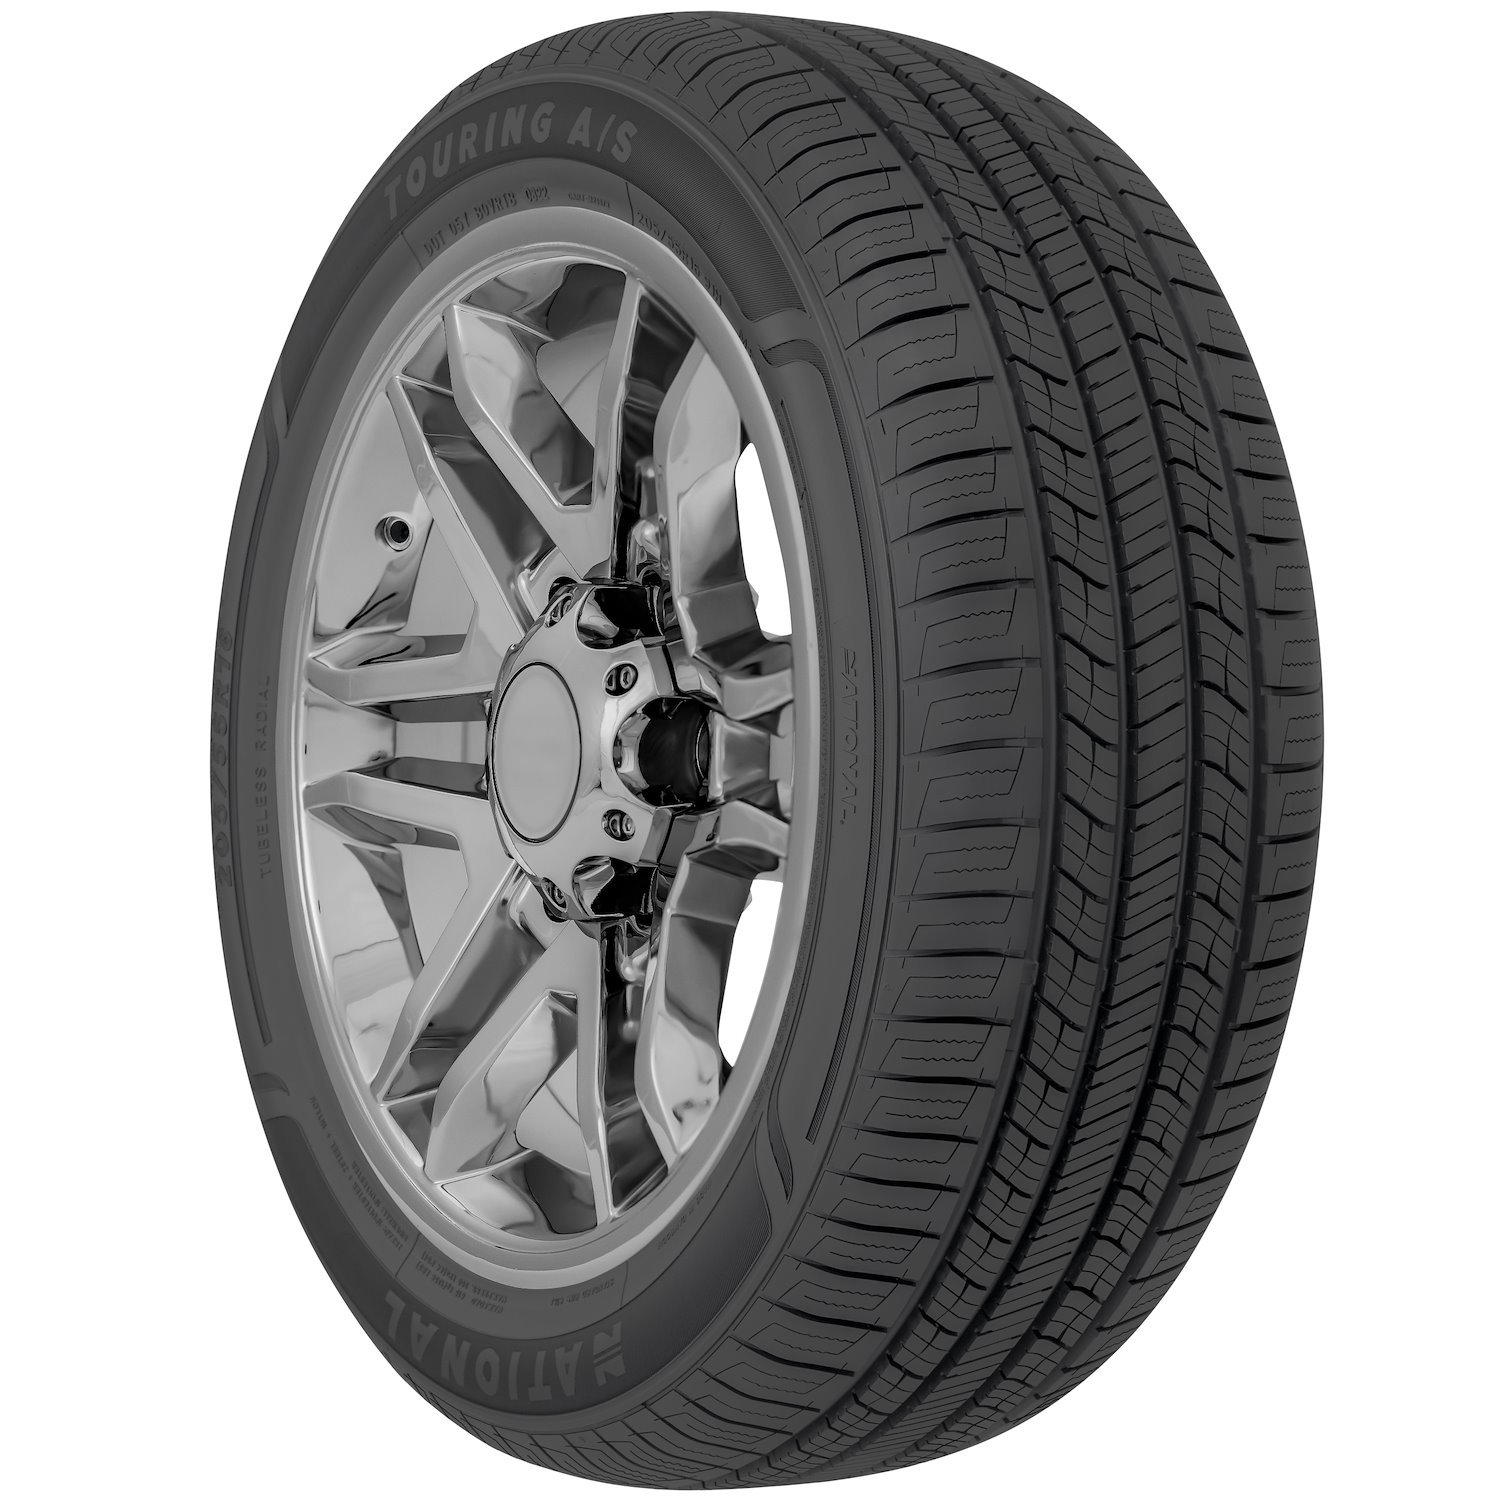 NLR82 Touring A/S Tire, 235/40R19